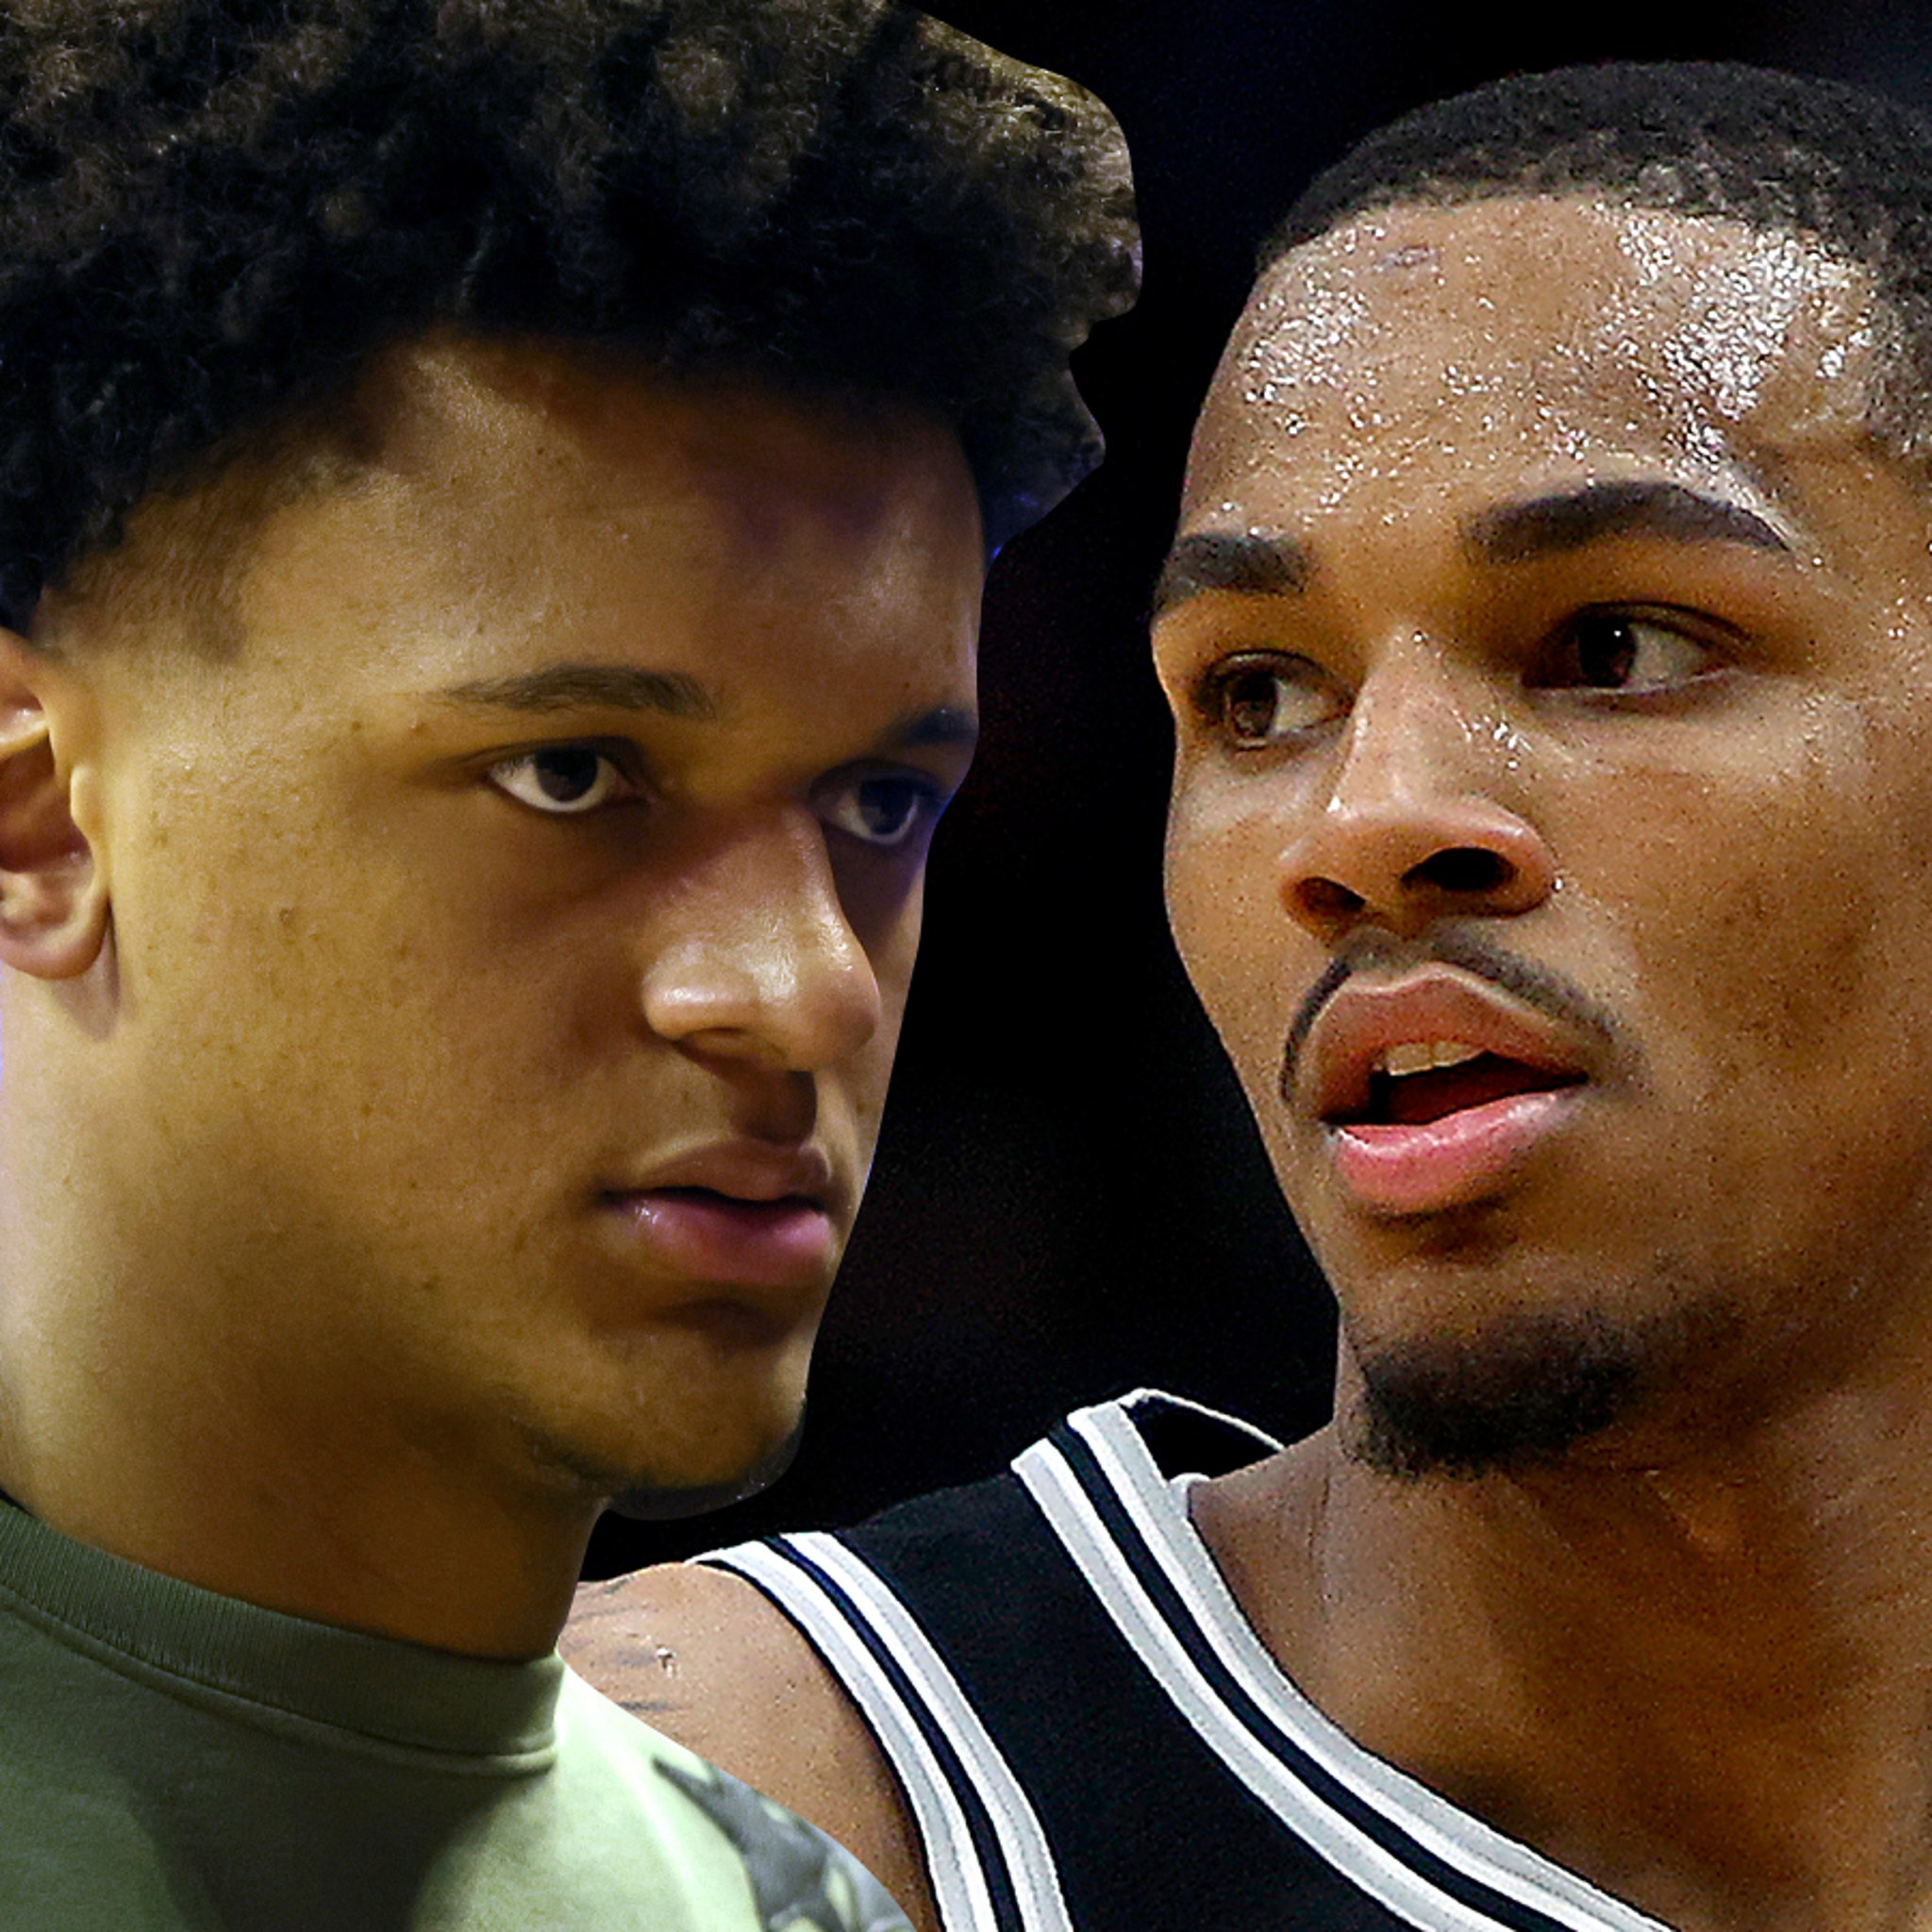 Why are Dejounte Murray and Paolo Banchero feuding on Instagram?